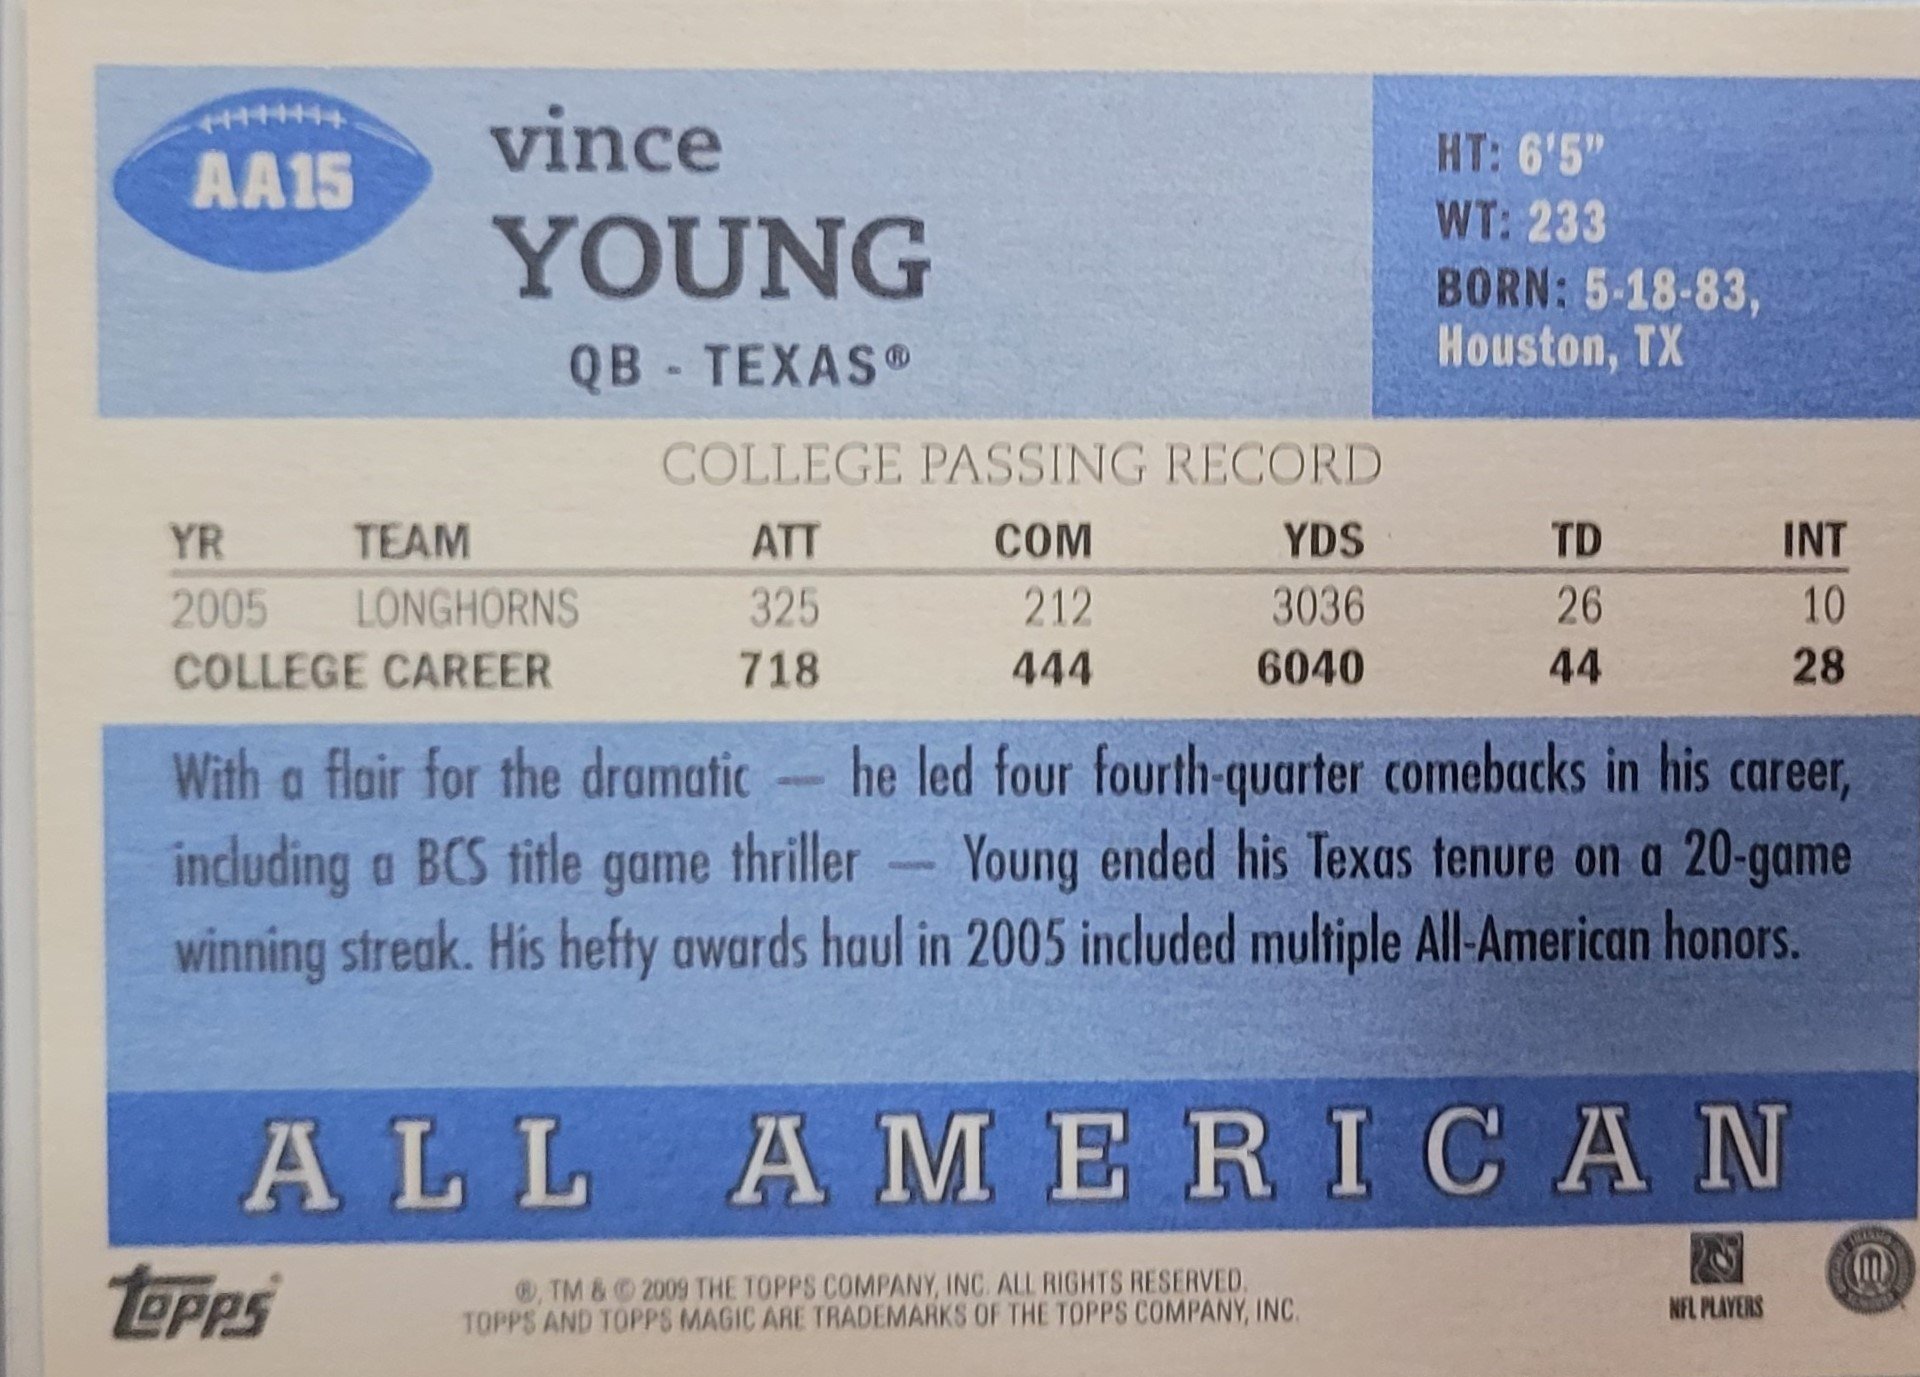 2005 Vince Young (3).jpg